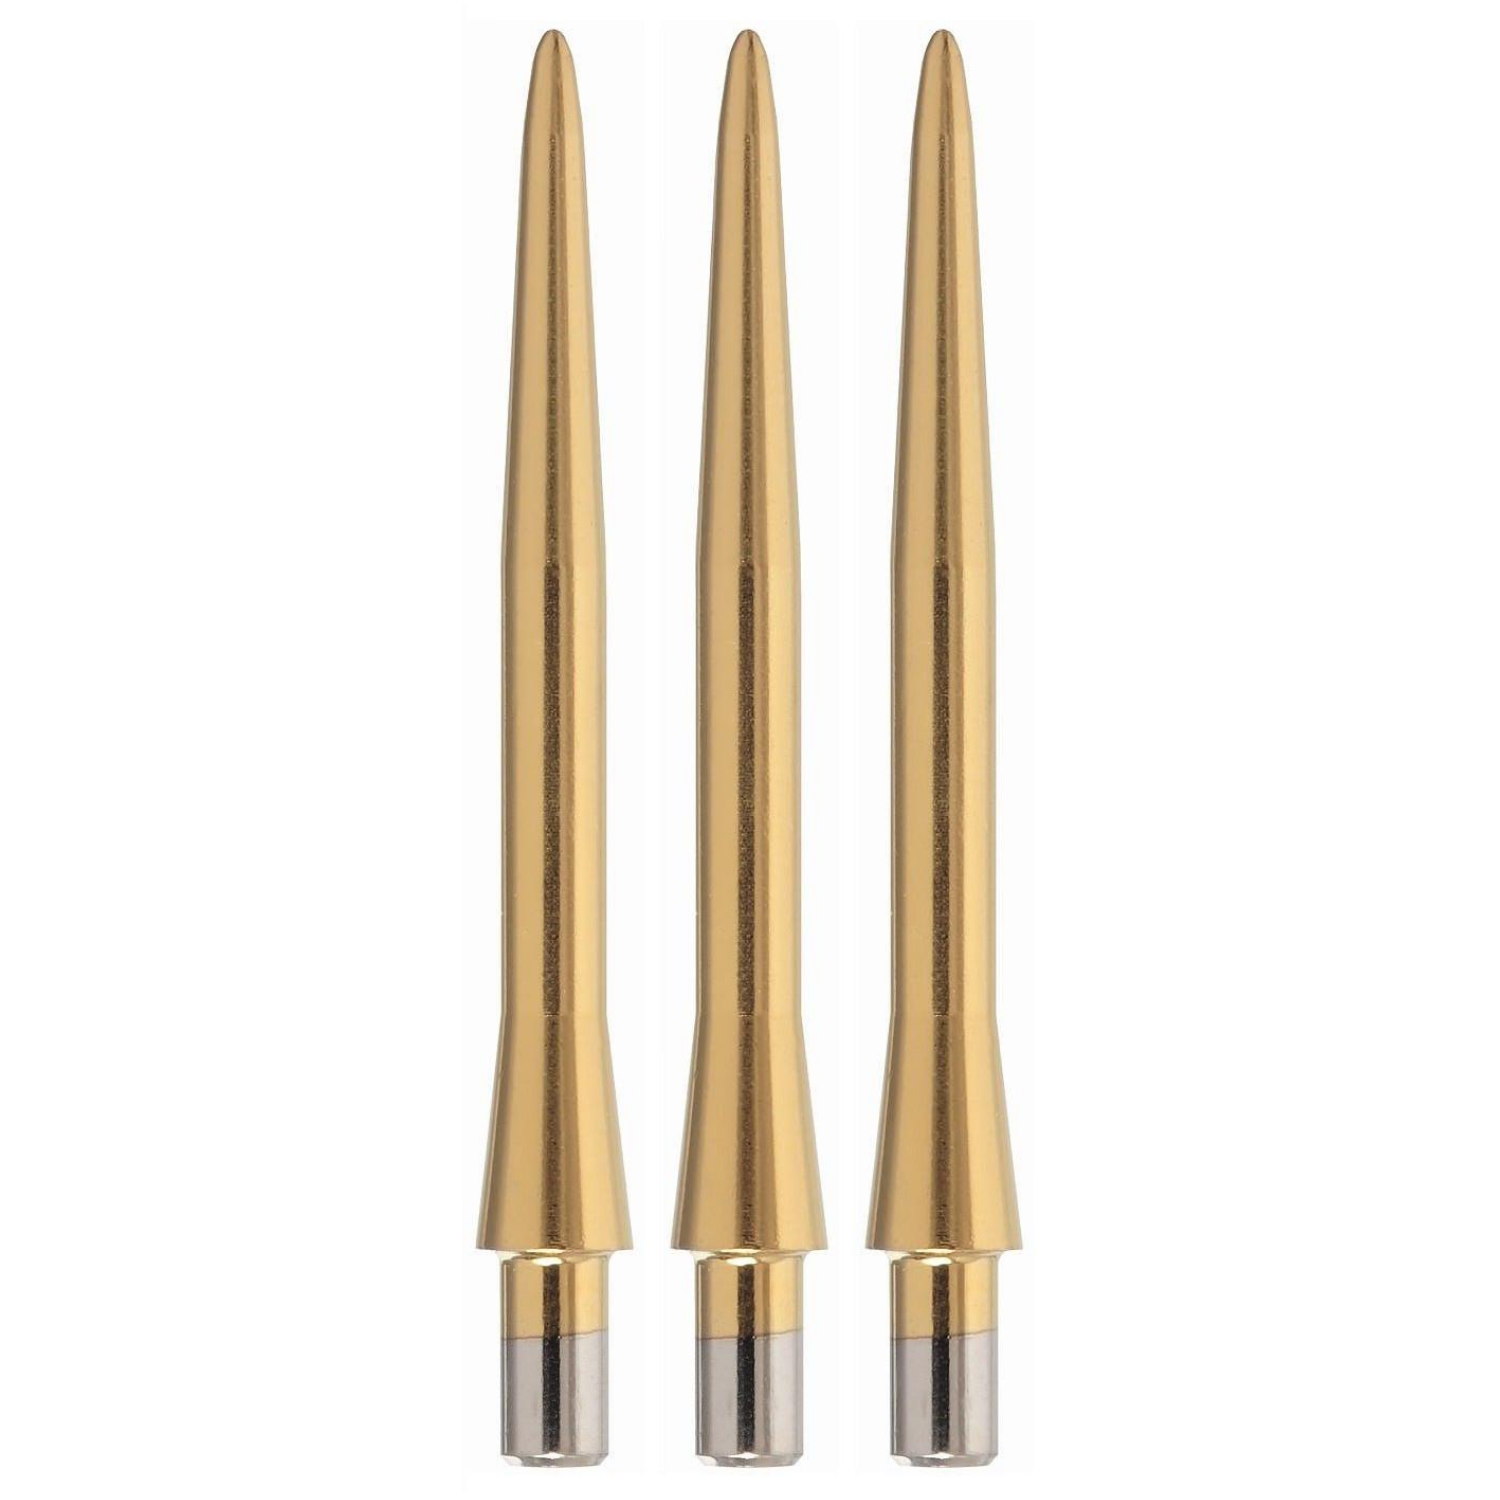 TARGET GOLD REPLACEMENT DART POINTS 32mm 